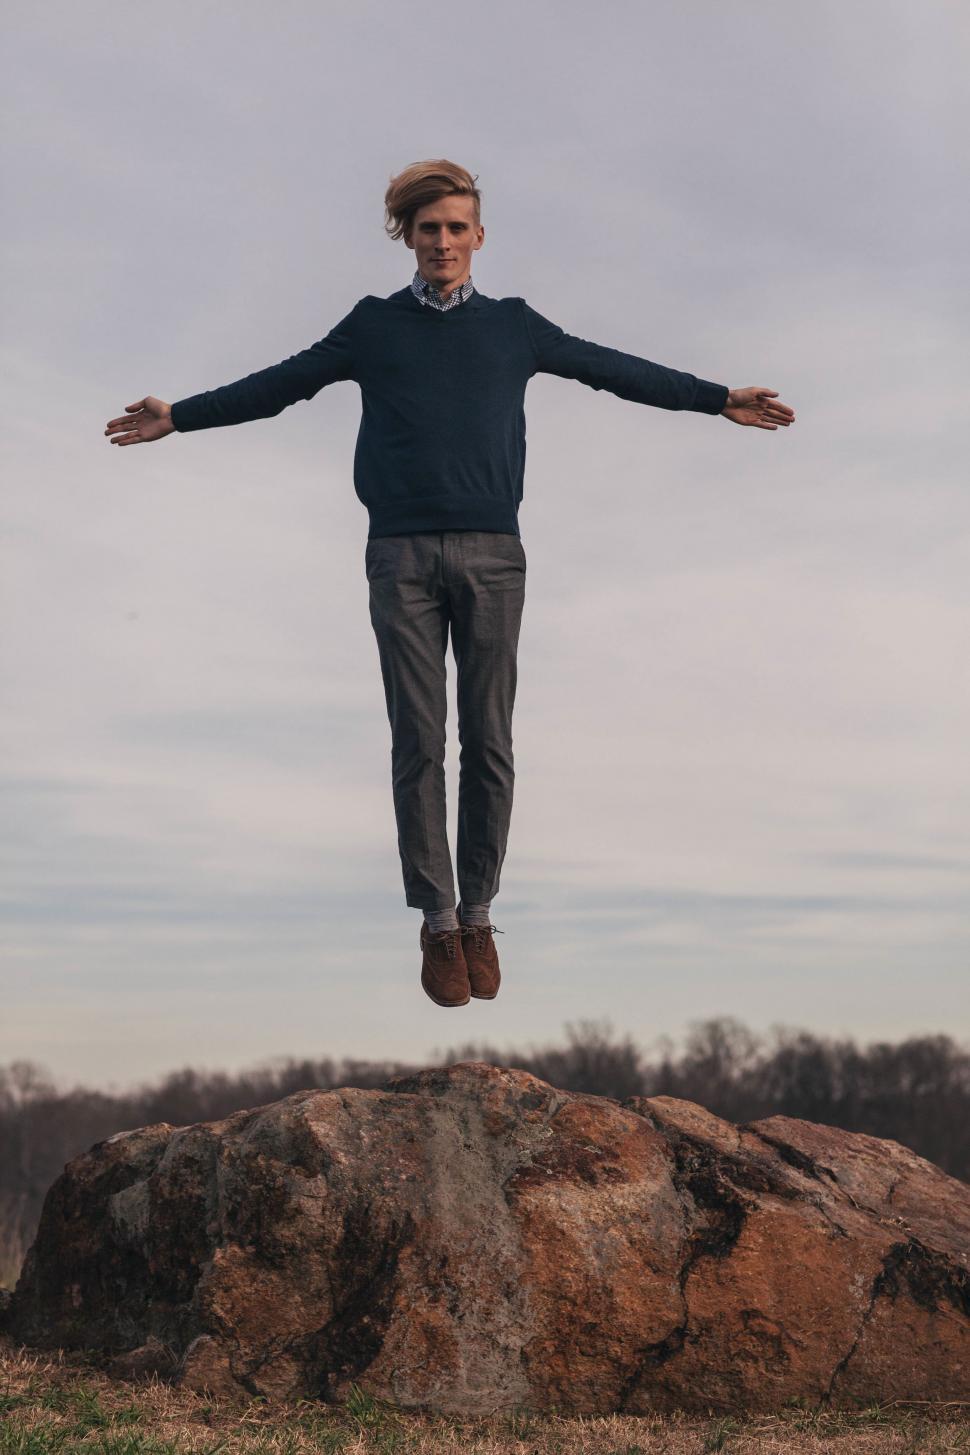 Free Image of Man Jumping in the Air With Outstretched Arms 